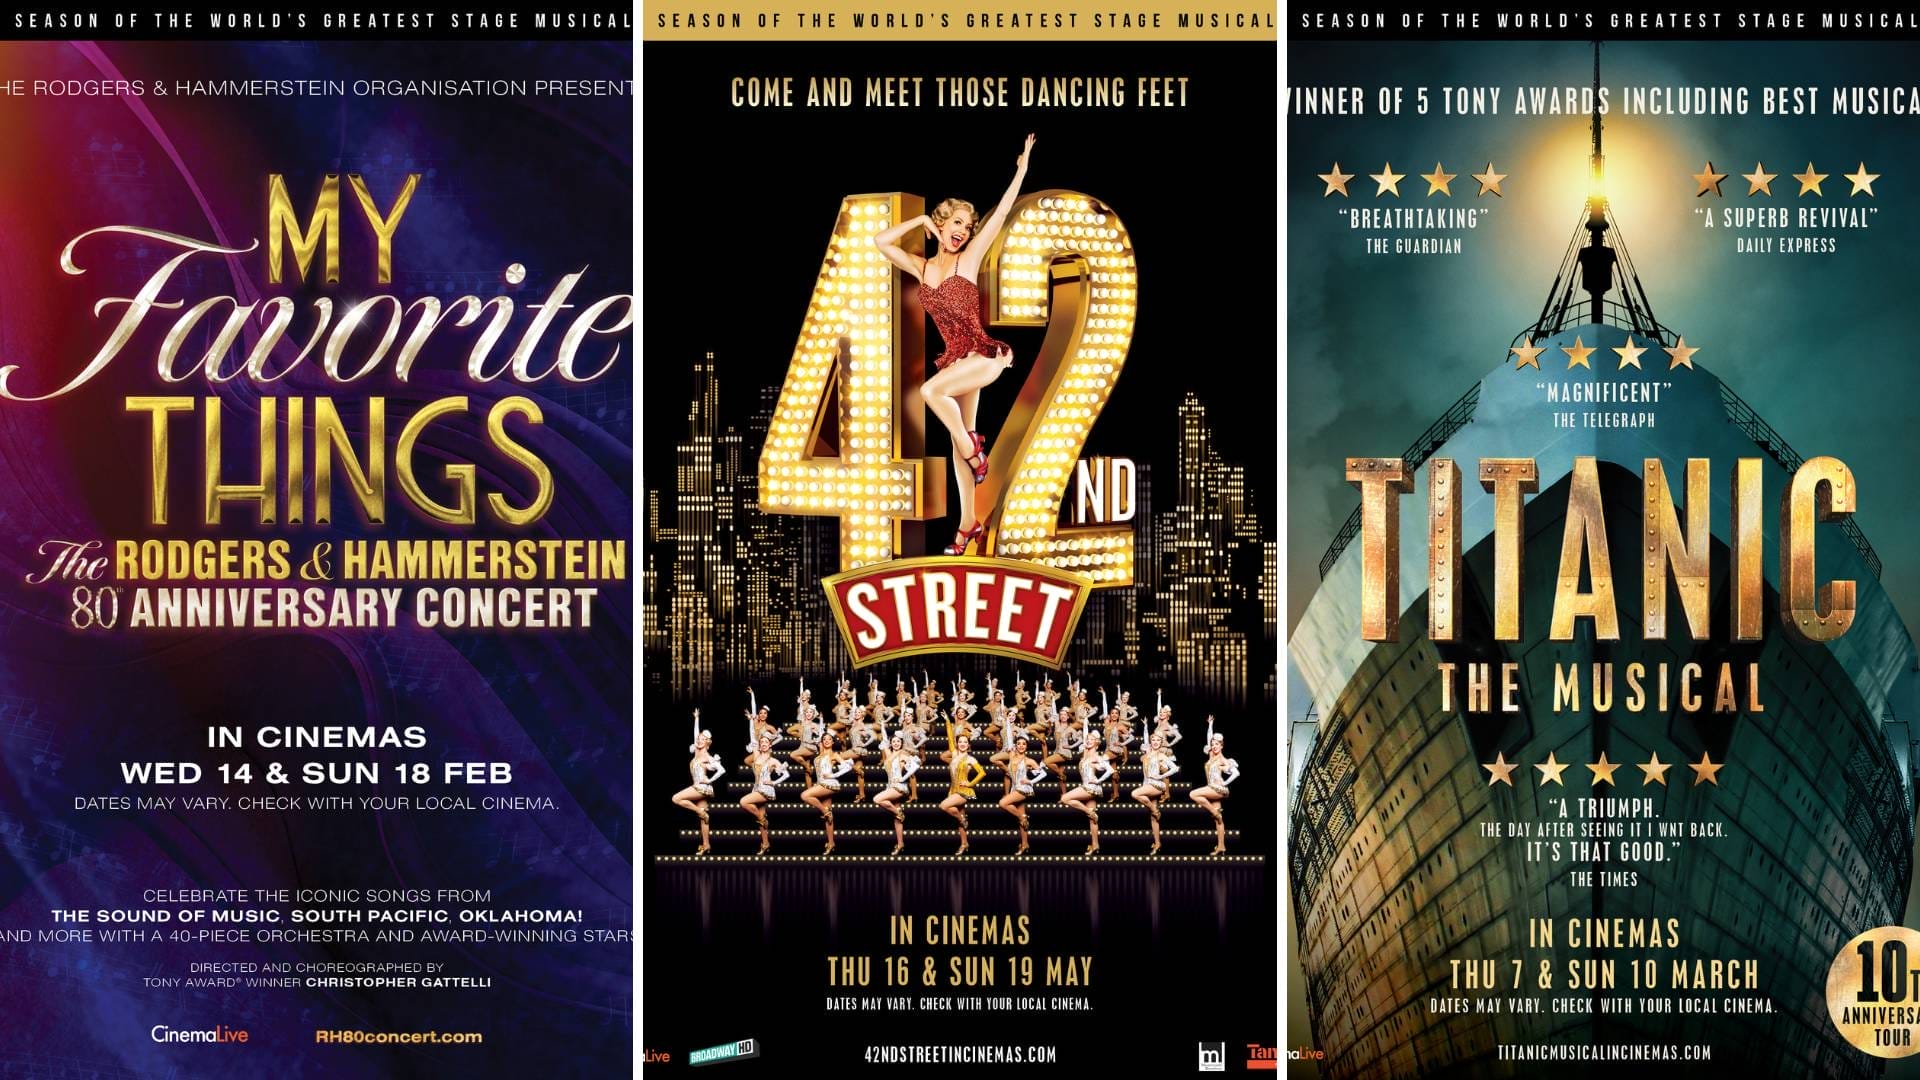 Cinemalive Announces A New Season Of Musicals Coming To Over 450